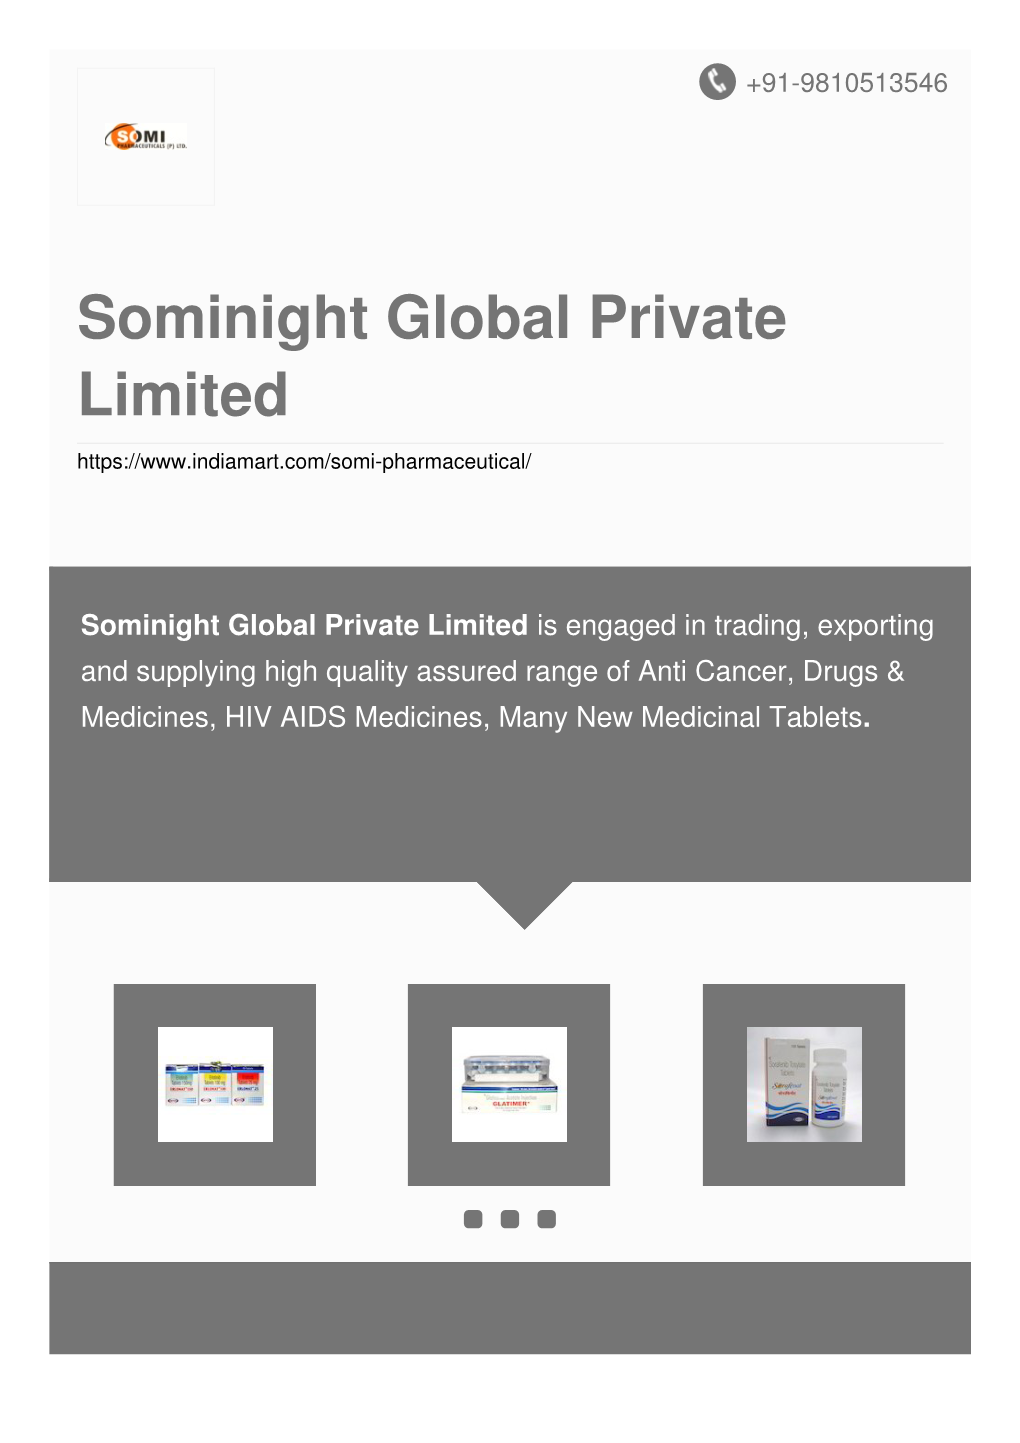 Sominight Global Private Limited